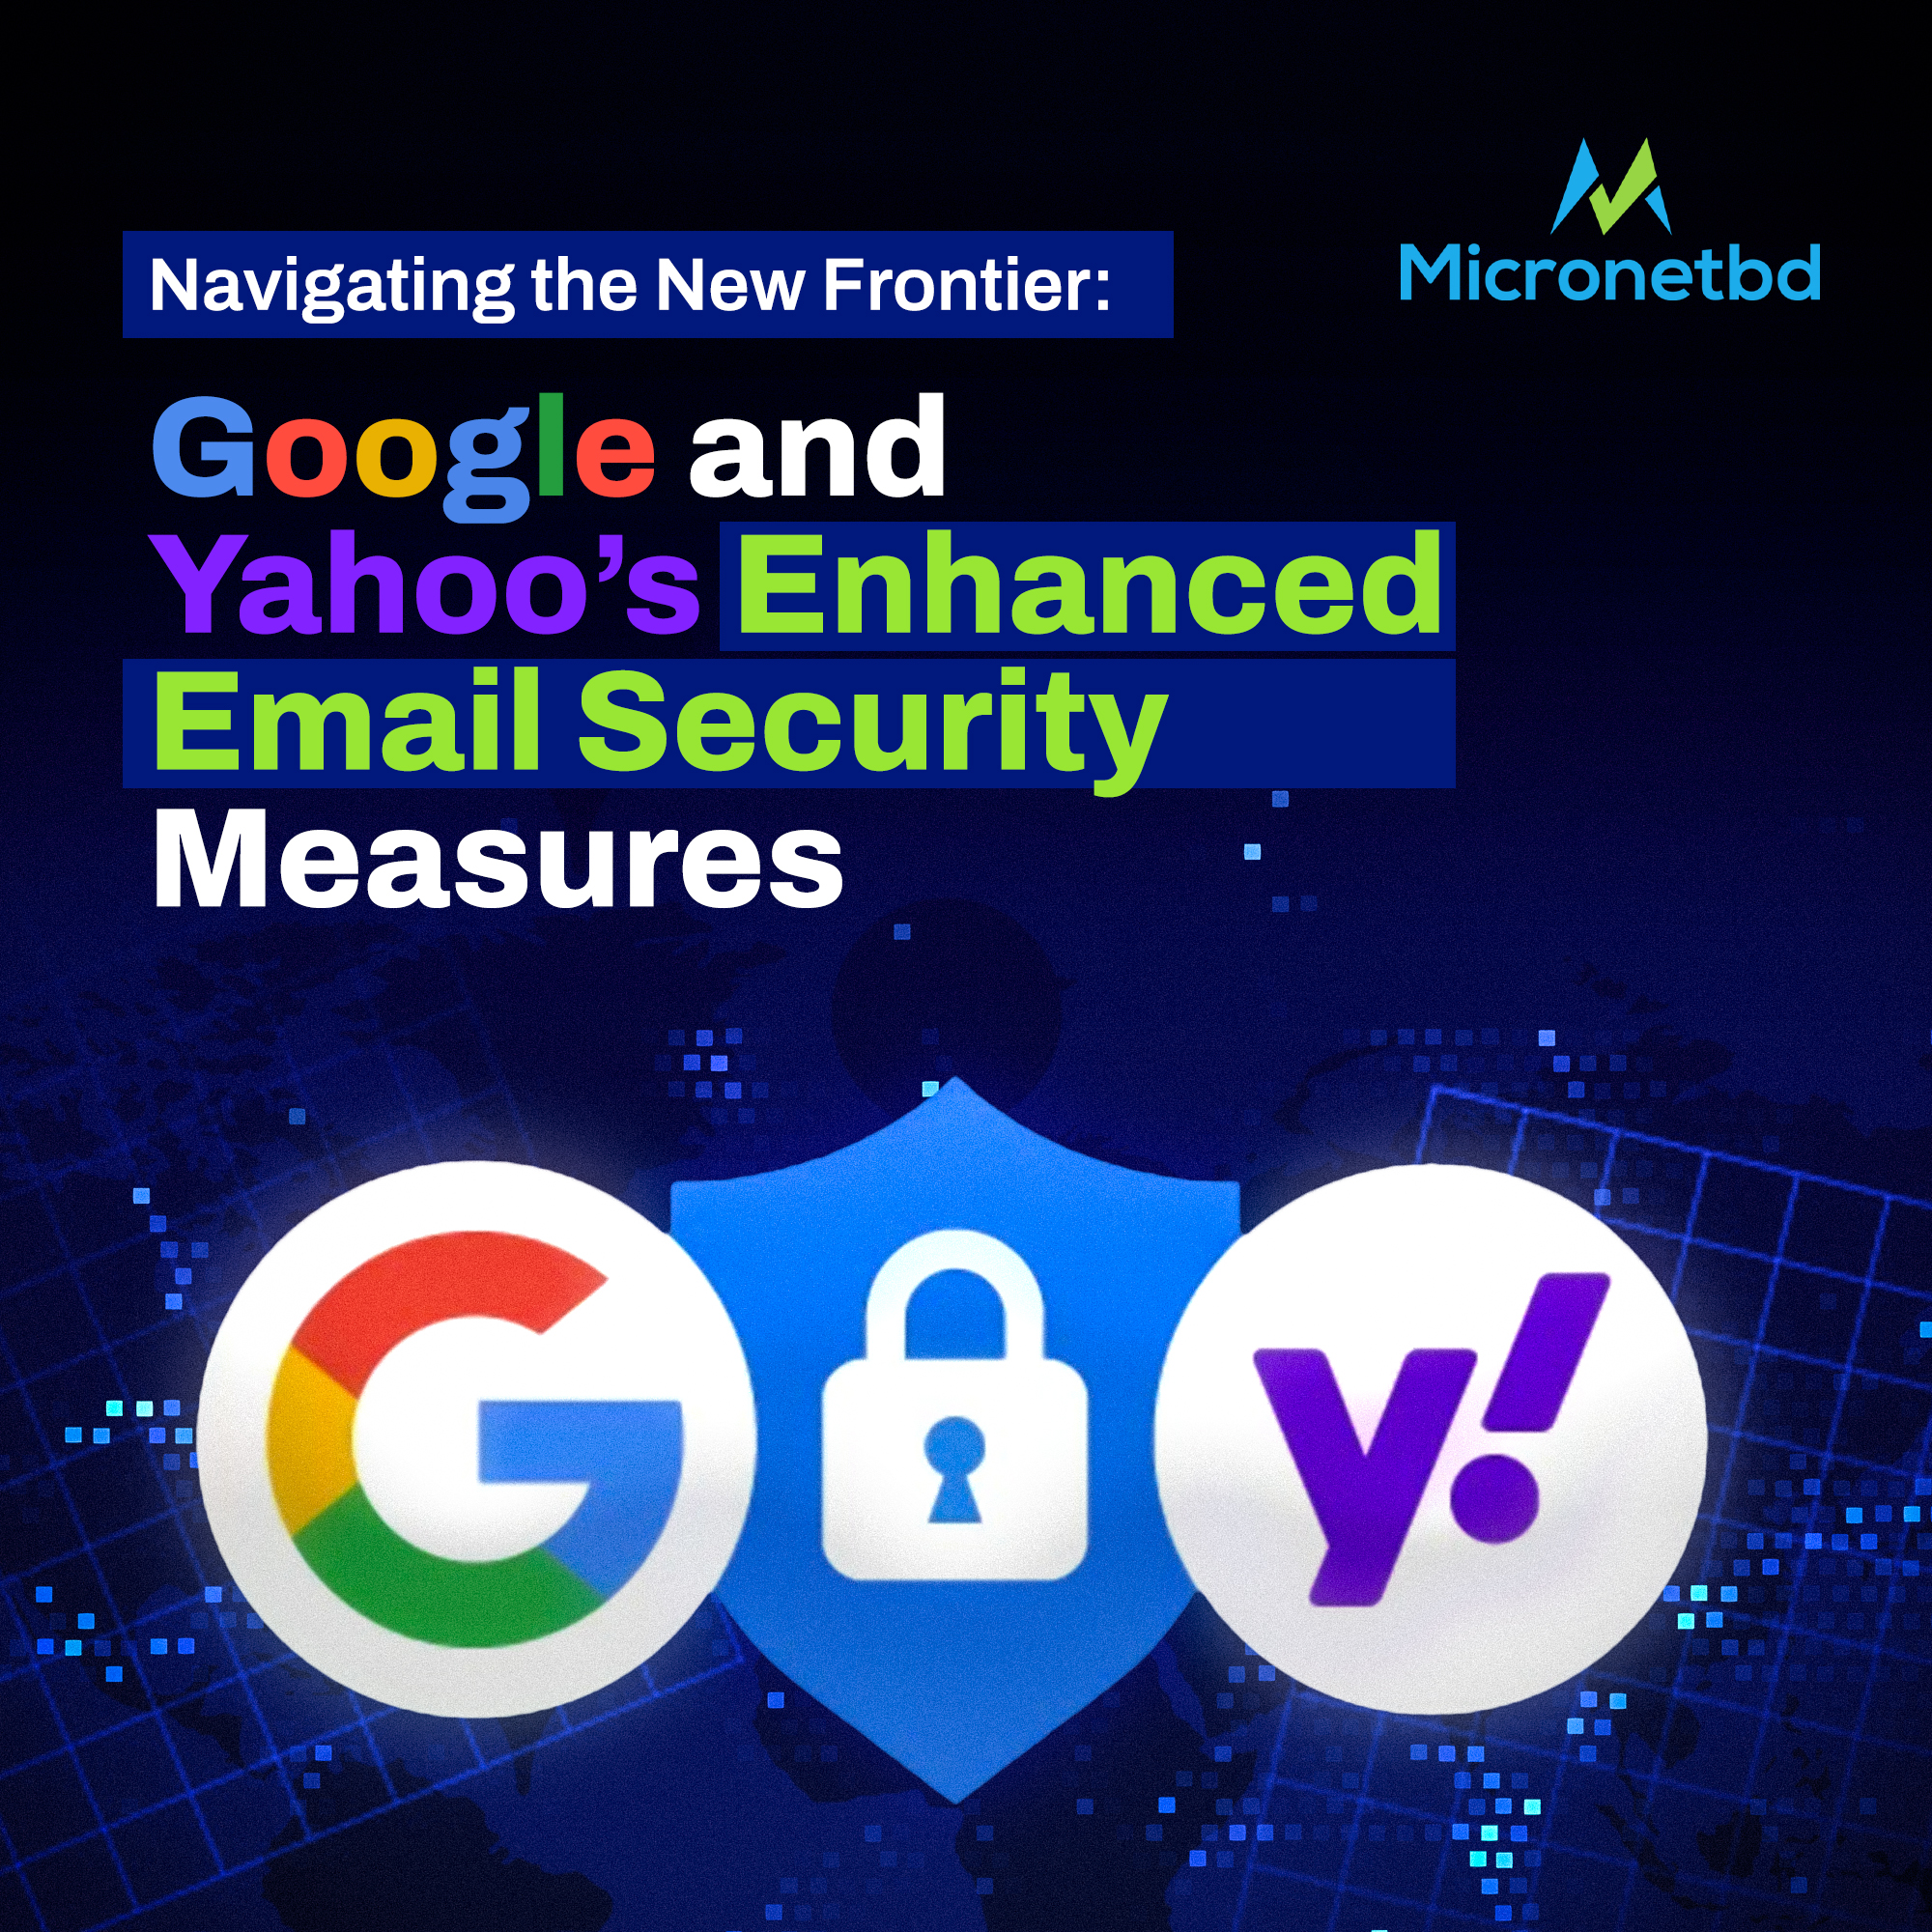 romotional graphic highlighting Google and Yahoo's Enhanced Email Security Measures with branded shields, digital background, and Micronetbd logo.